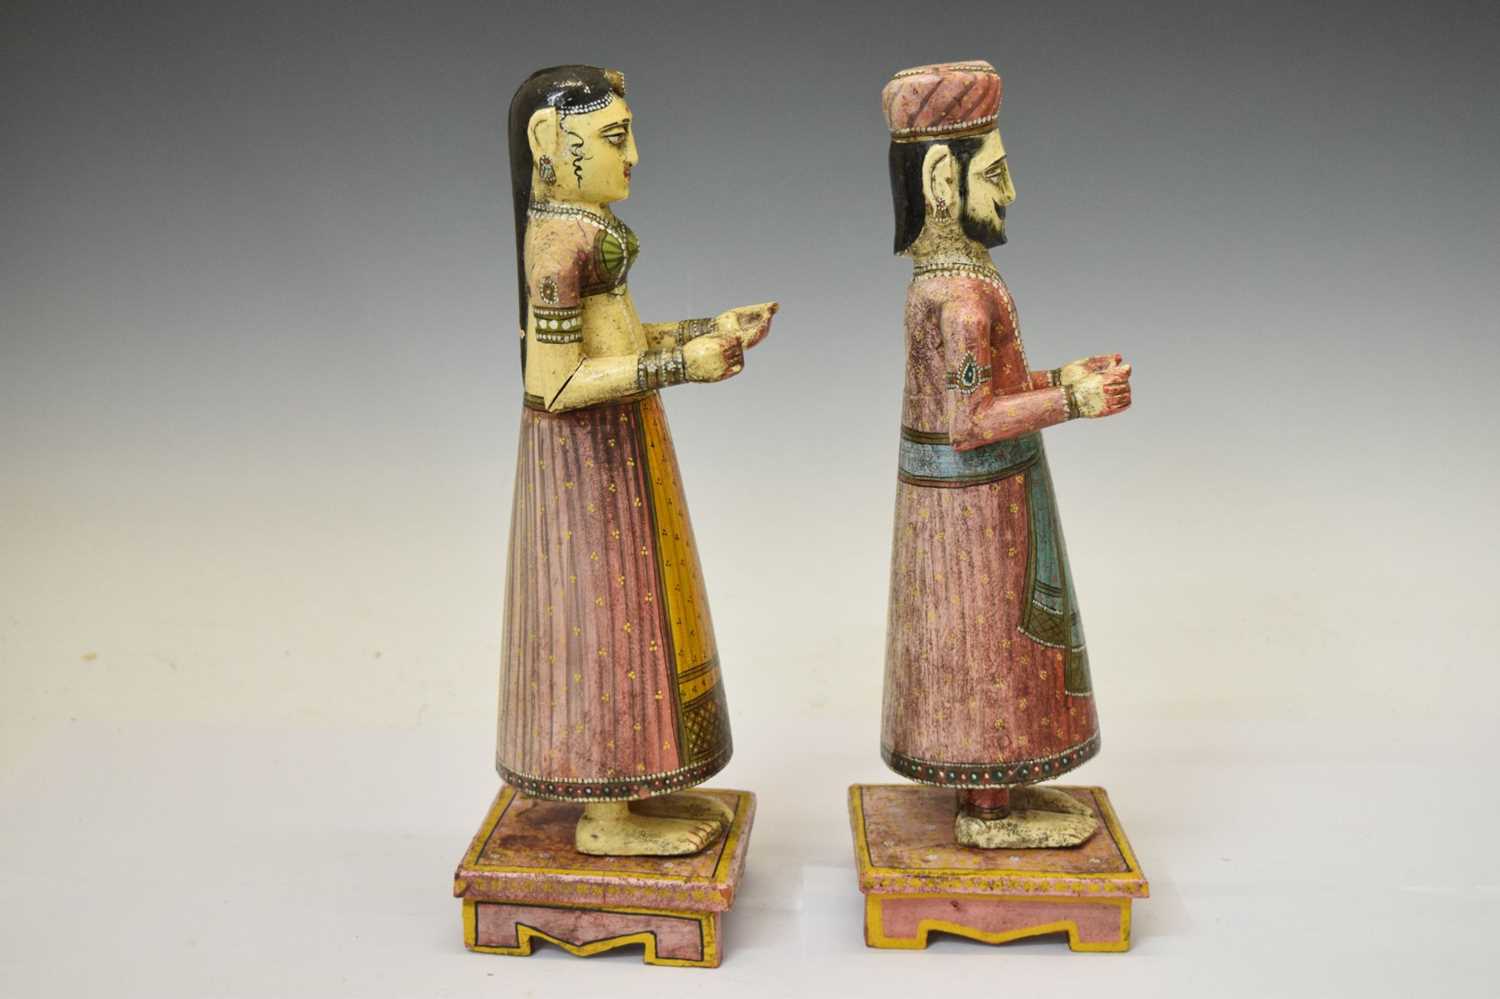 Pair of Indian painted wooden figures - Image 2 of 7